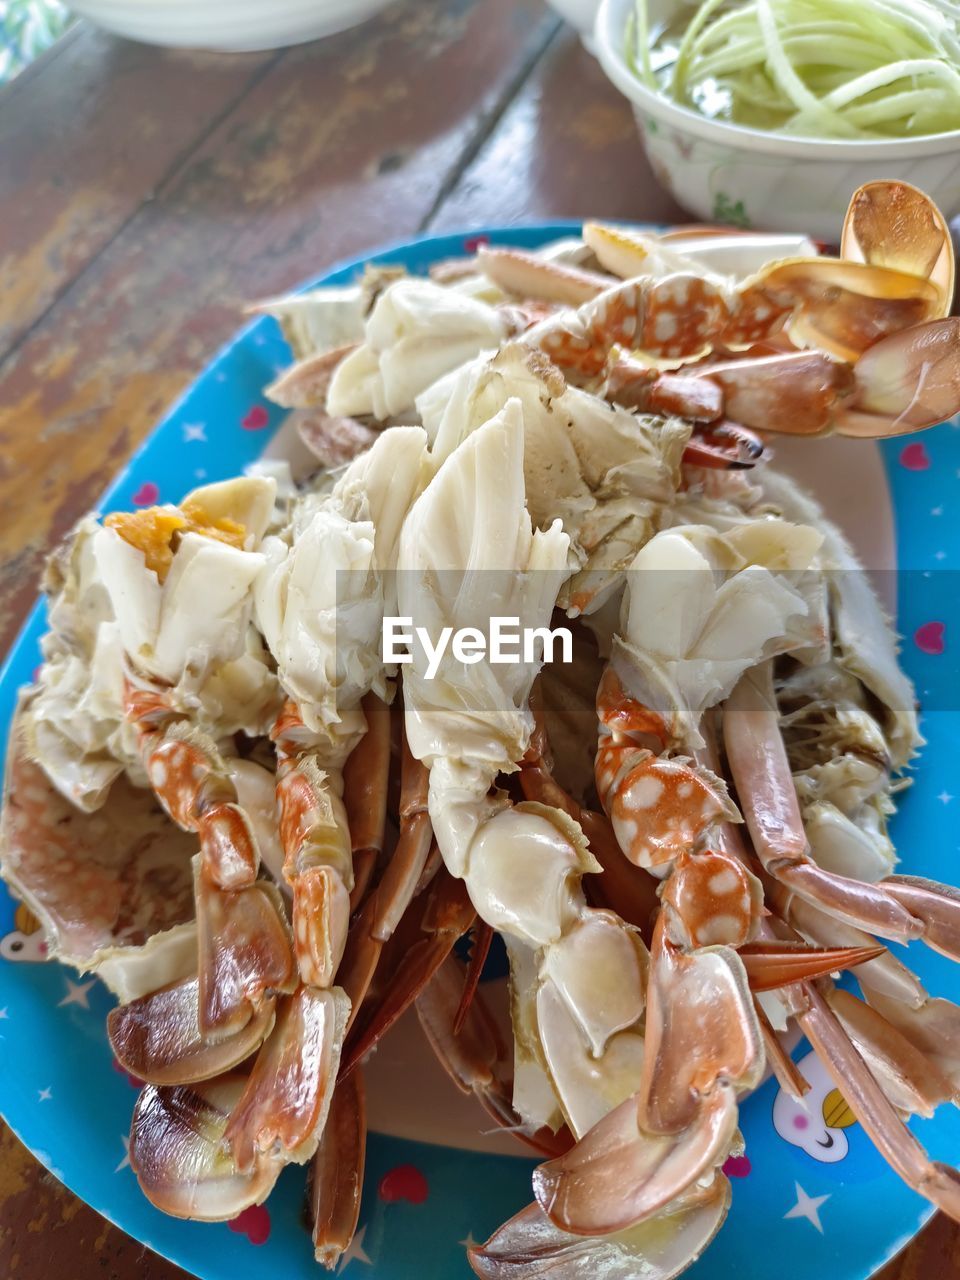 food, food and drink, freshness, seafood, healthy eating, crustacean, wellbeing, plate, no people, table, animal, high angle view, dish, indoors, meal, shrimp, meat, close-up, dungeness crab, crab